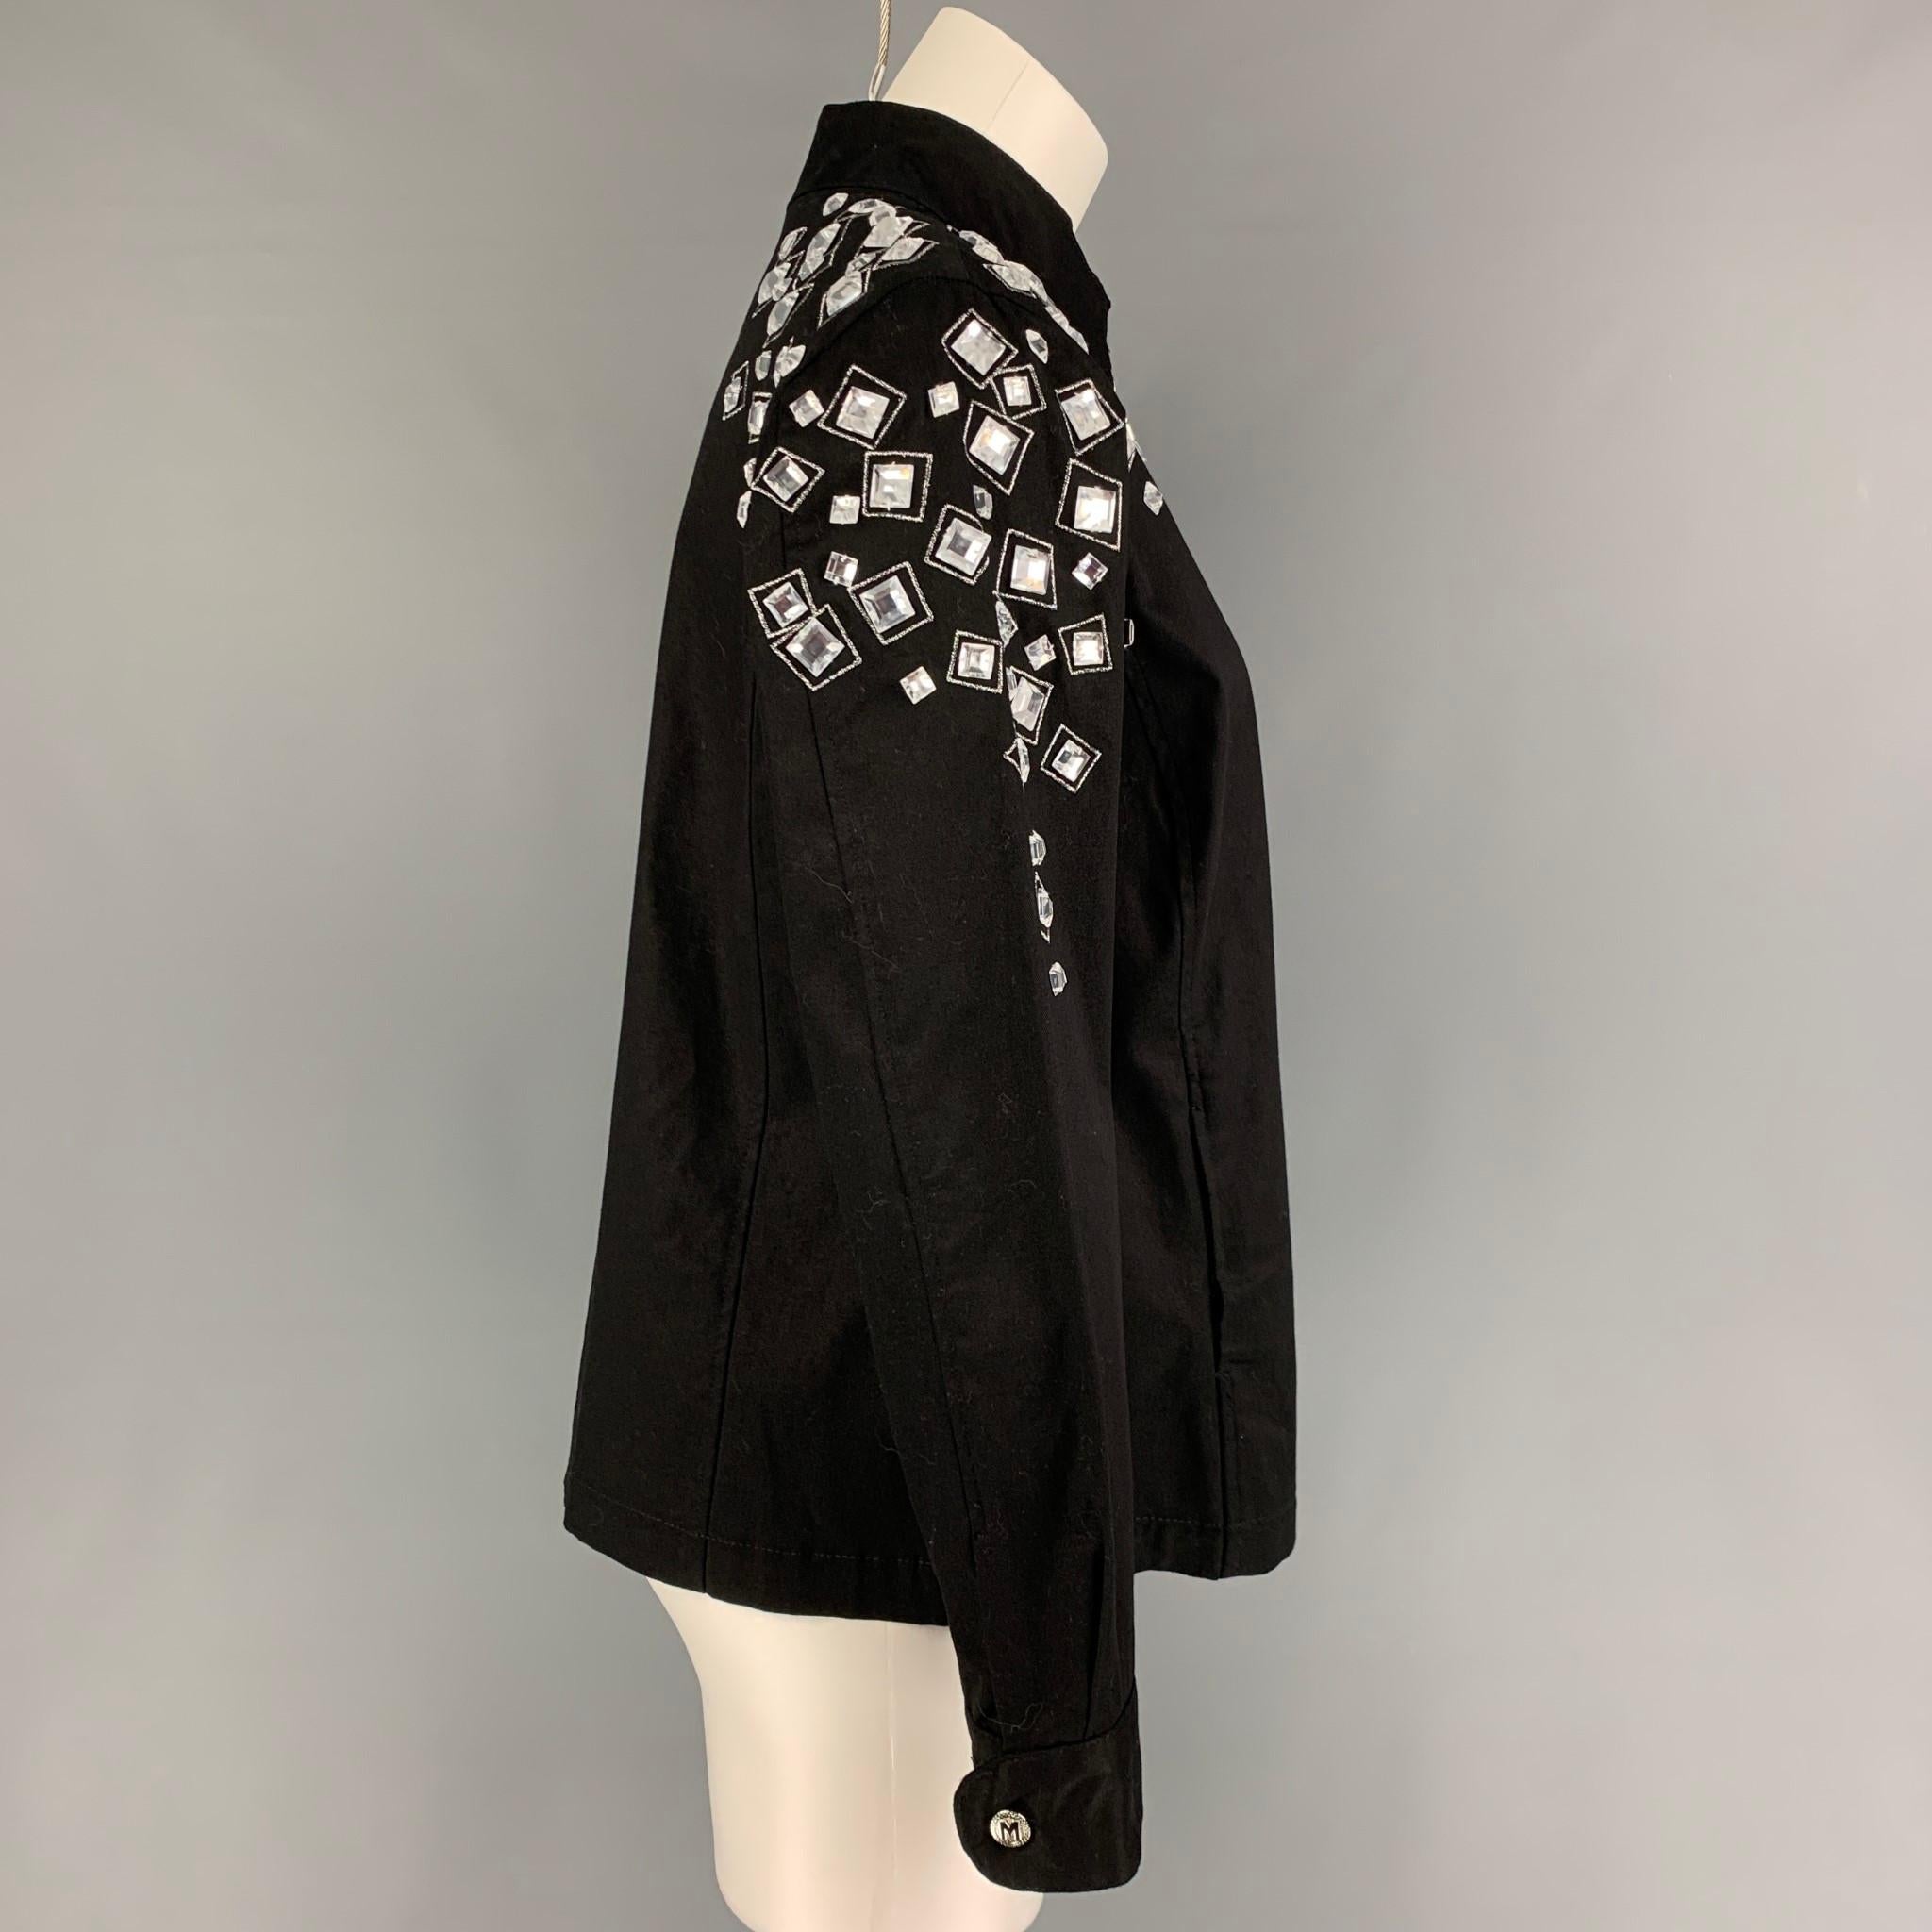 BOB MACKIE jacket comes in a black & silver cotton featuring crystal embellishments, stand up collar, and a zip up closure. 

Very Good Pre-Owned Condition.
Marked: 1X

Measurements:

Shoulder: 18 in.
Bust: 50 in.
Sleeve: 24 in.
Length: 25 in. 